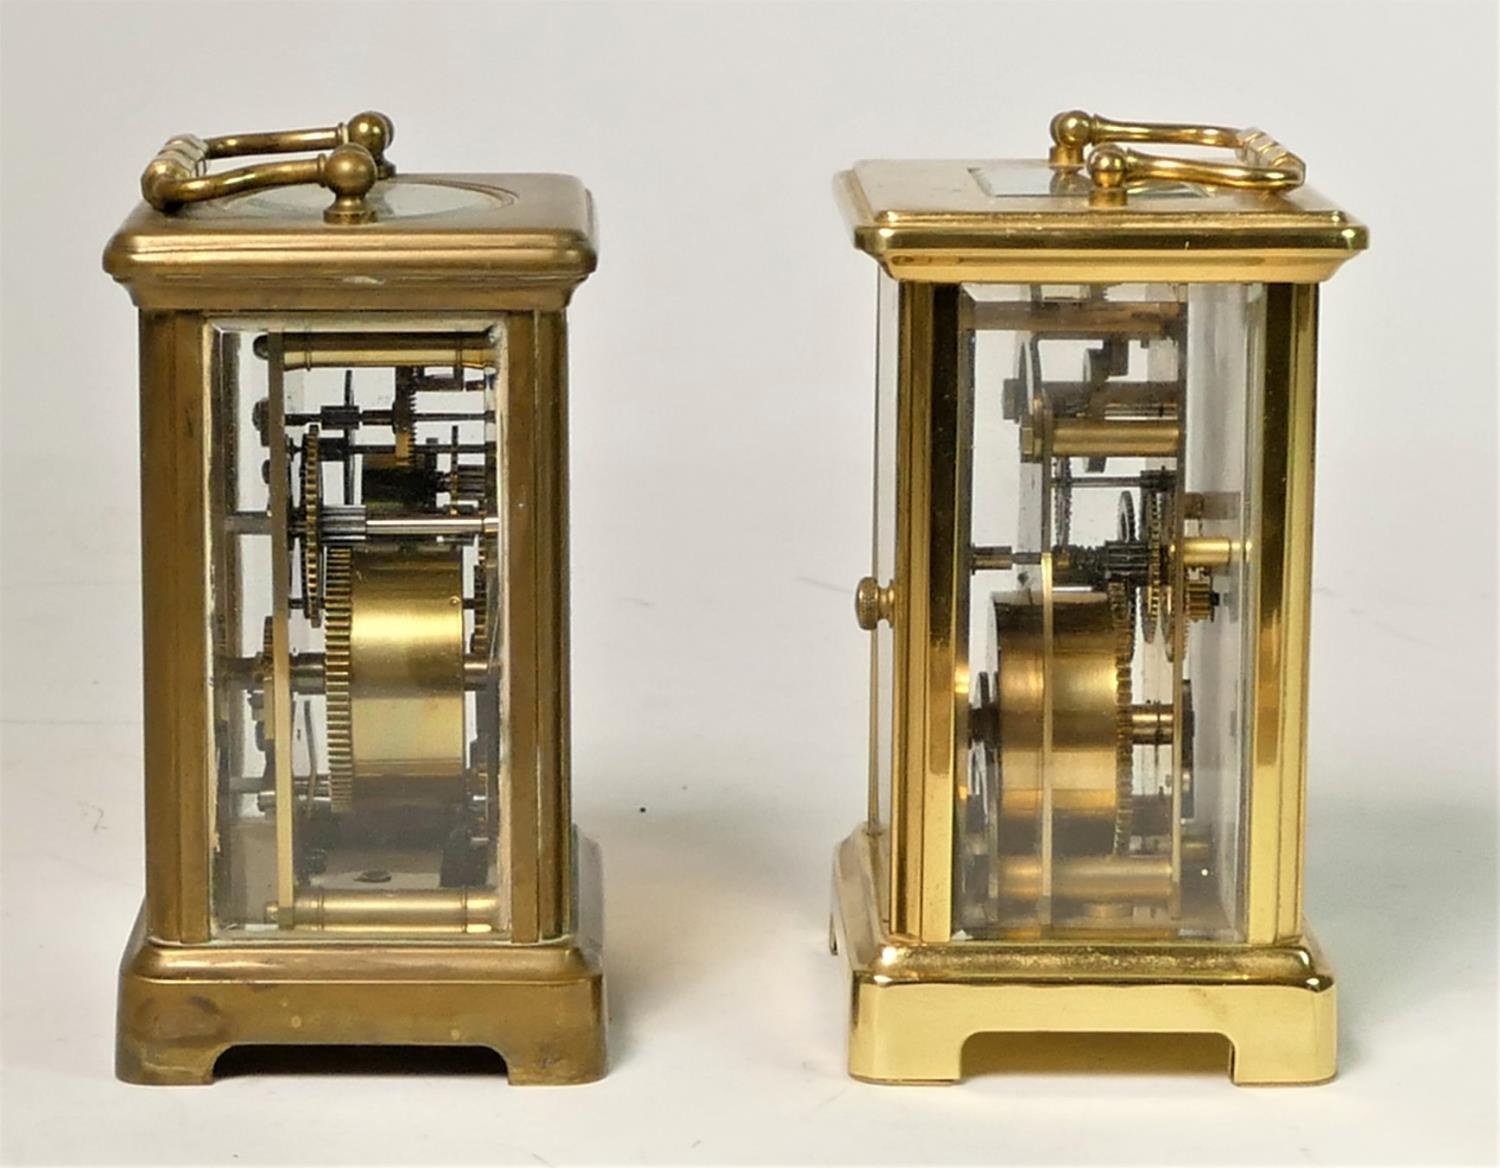 A Watches of Switzerland 8 day manual wind carriage clock 11cm, together with an unmarked manual - Image 2 of 4